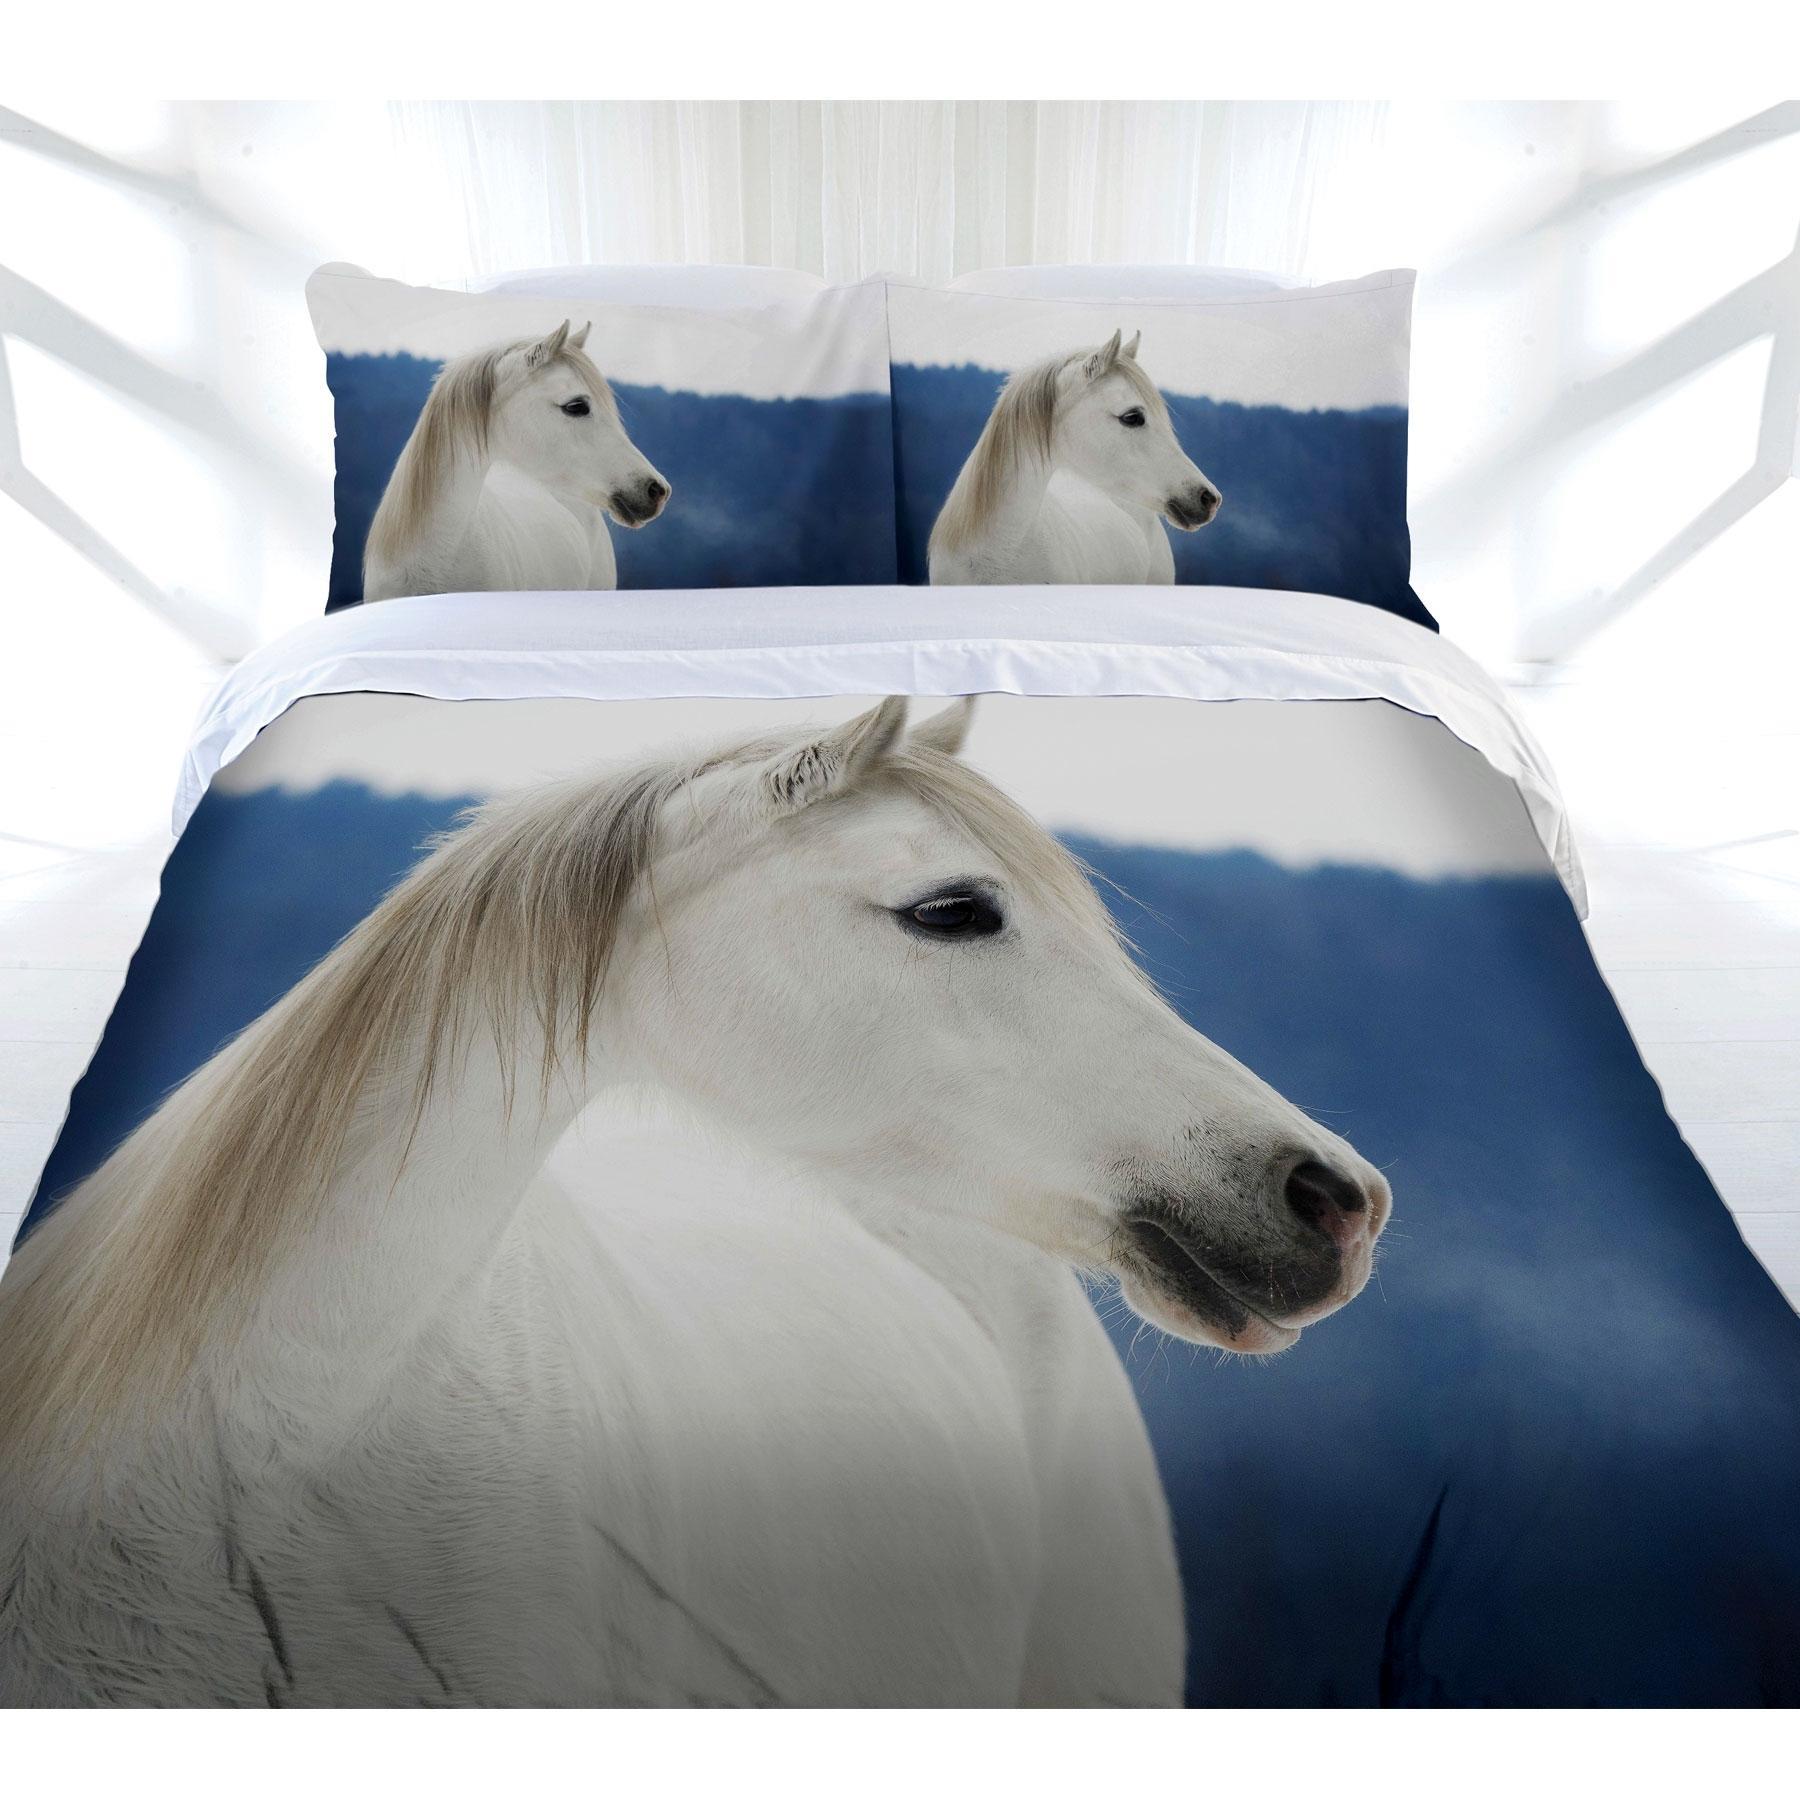 Snowy Horse Quilt Cover Set Queen